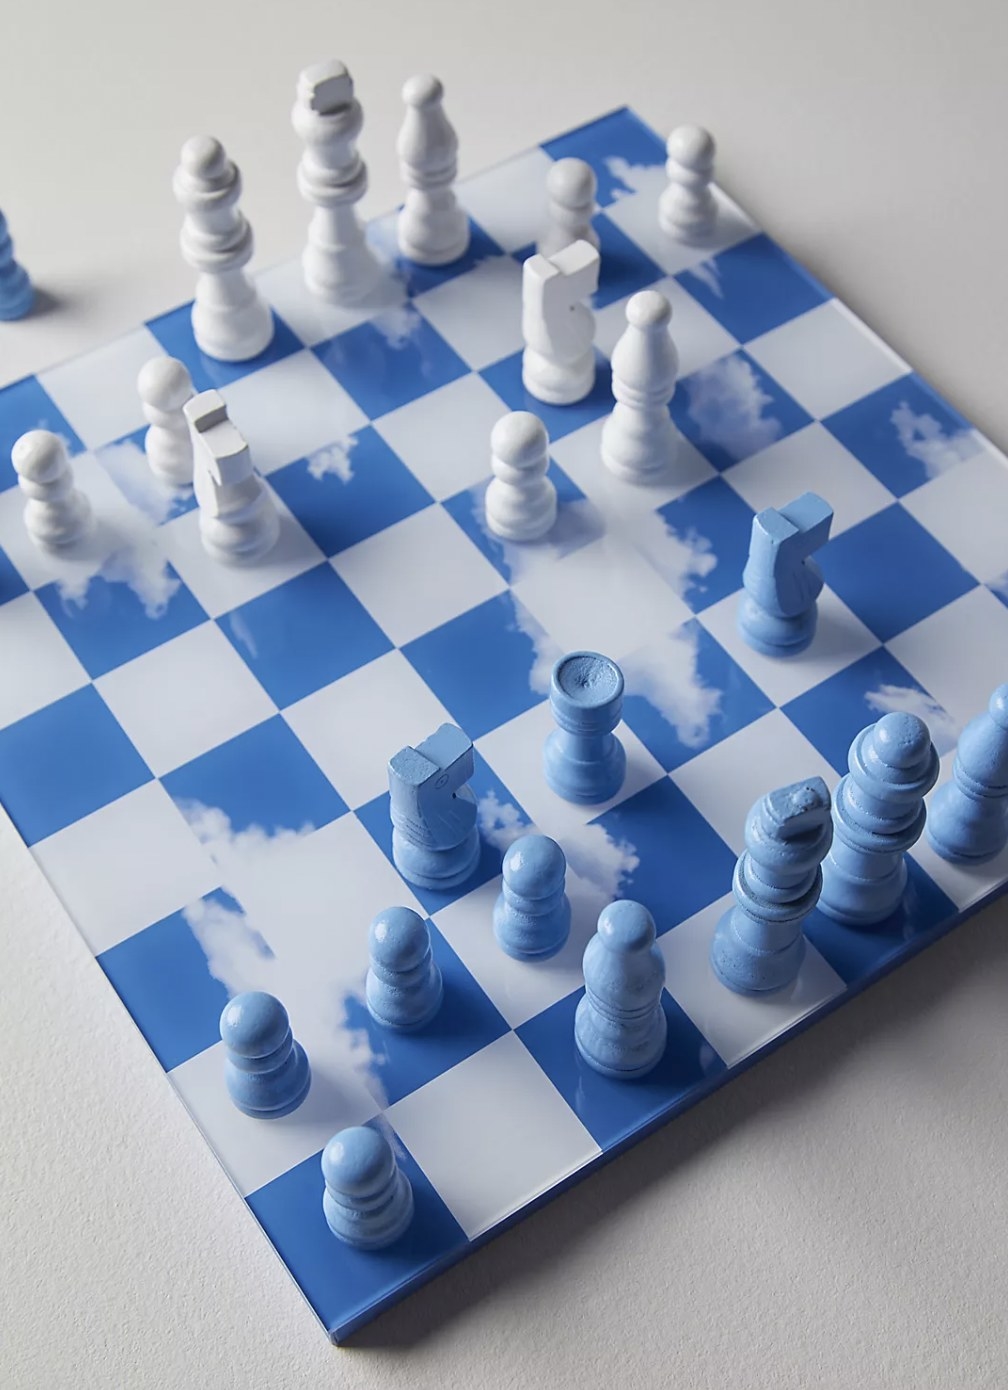 the chess board with cloud designs and blue and white pieces